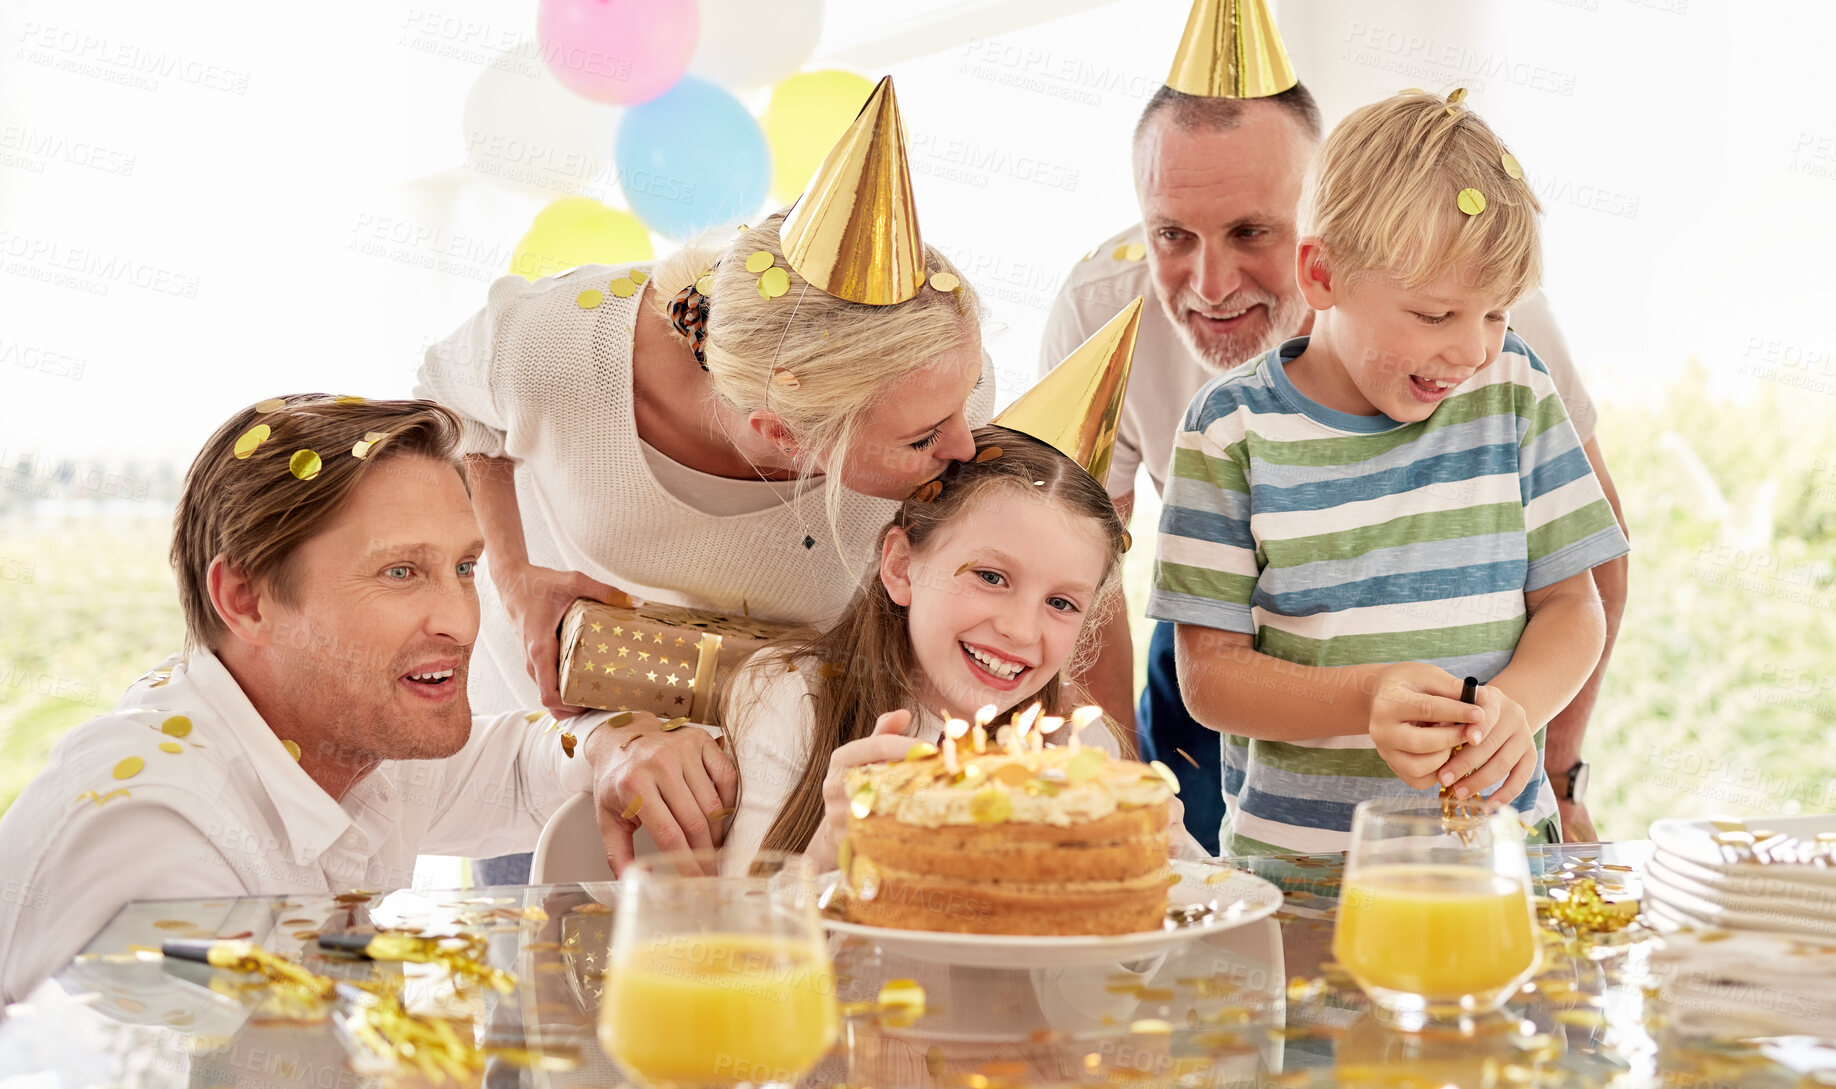 Buy stock photo Girl, birthday cake and family celebrating a children event with food and a party outdoor. Happy smile of kids, father and mom kiss to celebrate youth and kid event with happiness, love and confetti